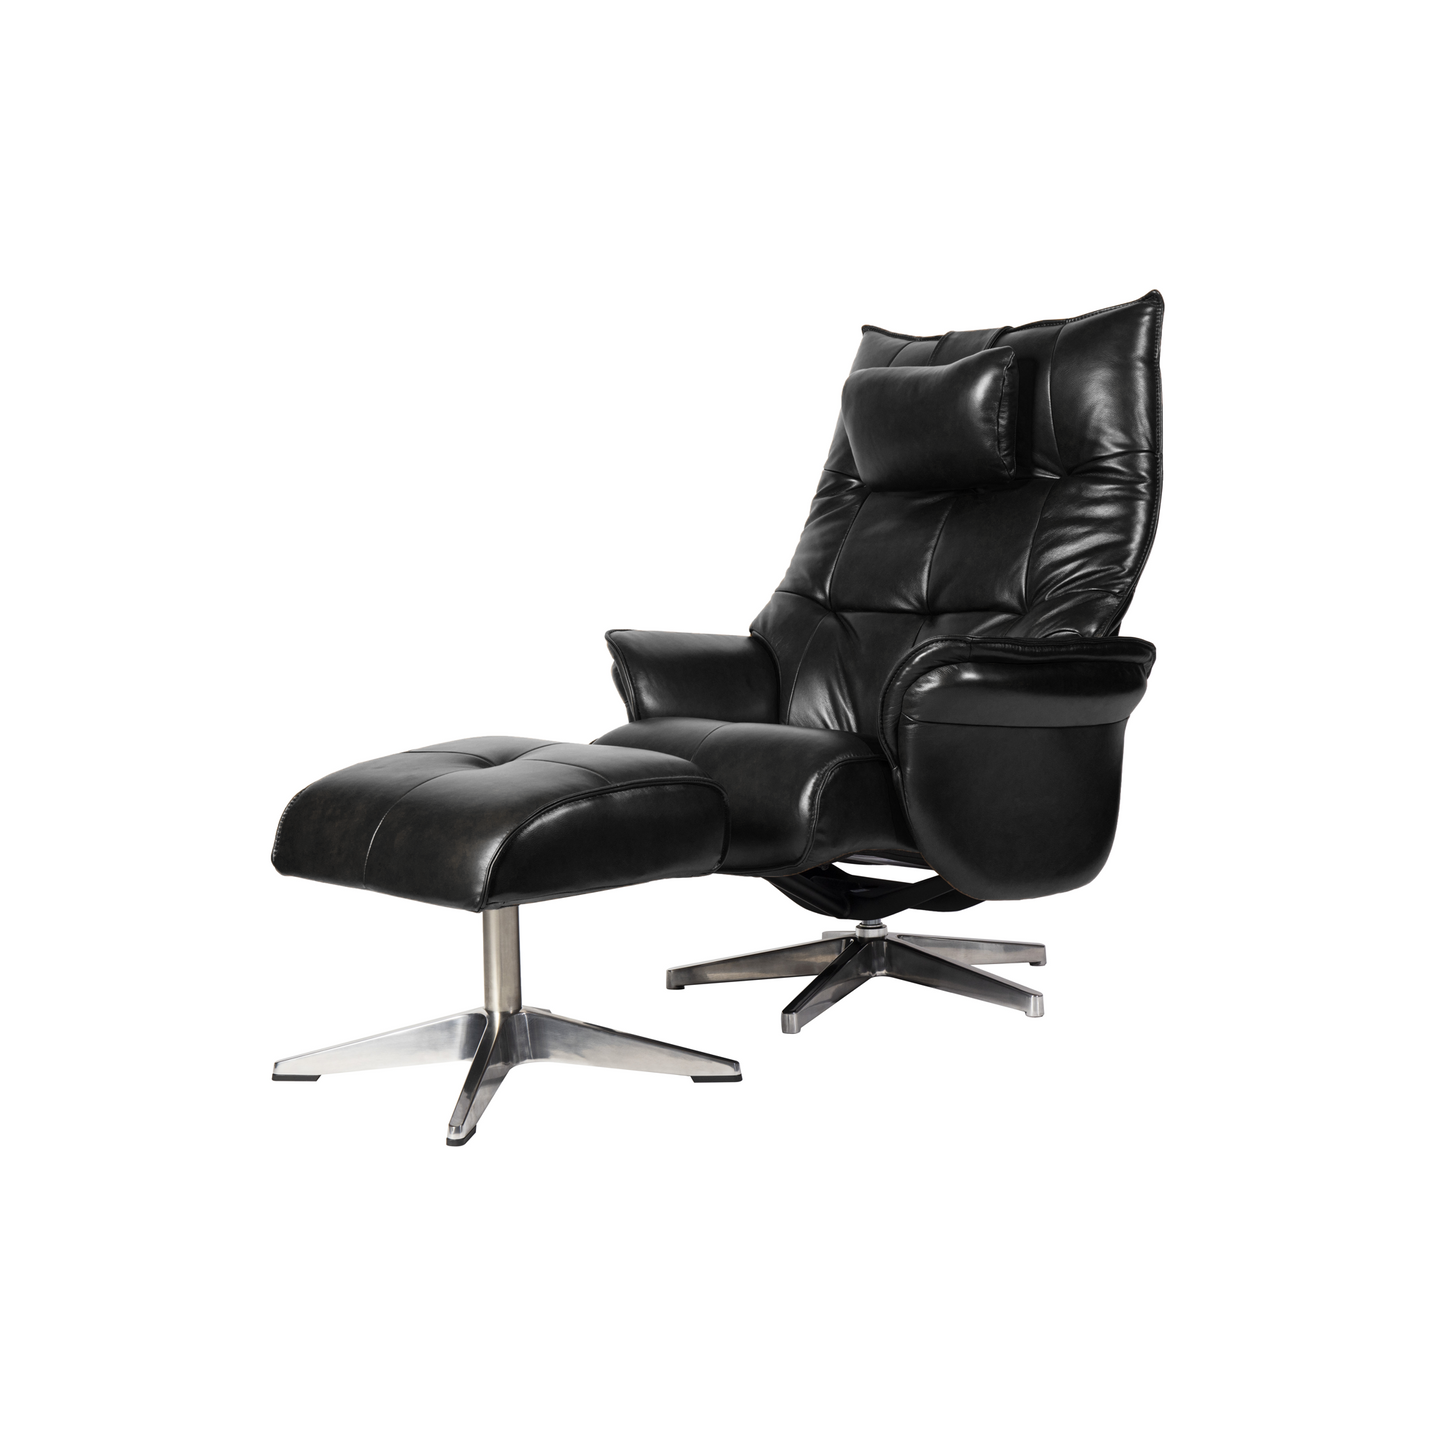 Constructed from a reinforced steel frame, the Hana Recliner Lounge Chair offers strength and stability, while the soft bovine leather upholstery envelops the user in comfort. With precision contouring to the back and sides, this chair showcases a dynamic design, and finely tailored stitching adds to its premium feel.